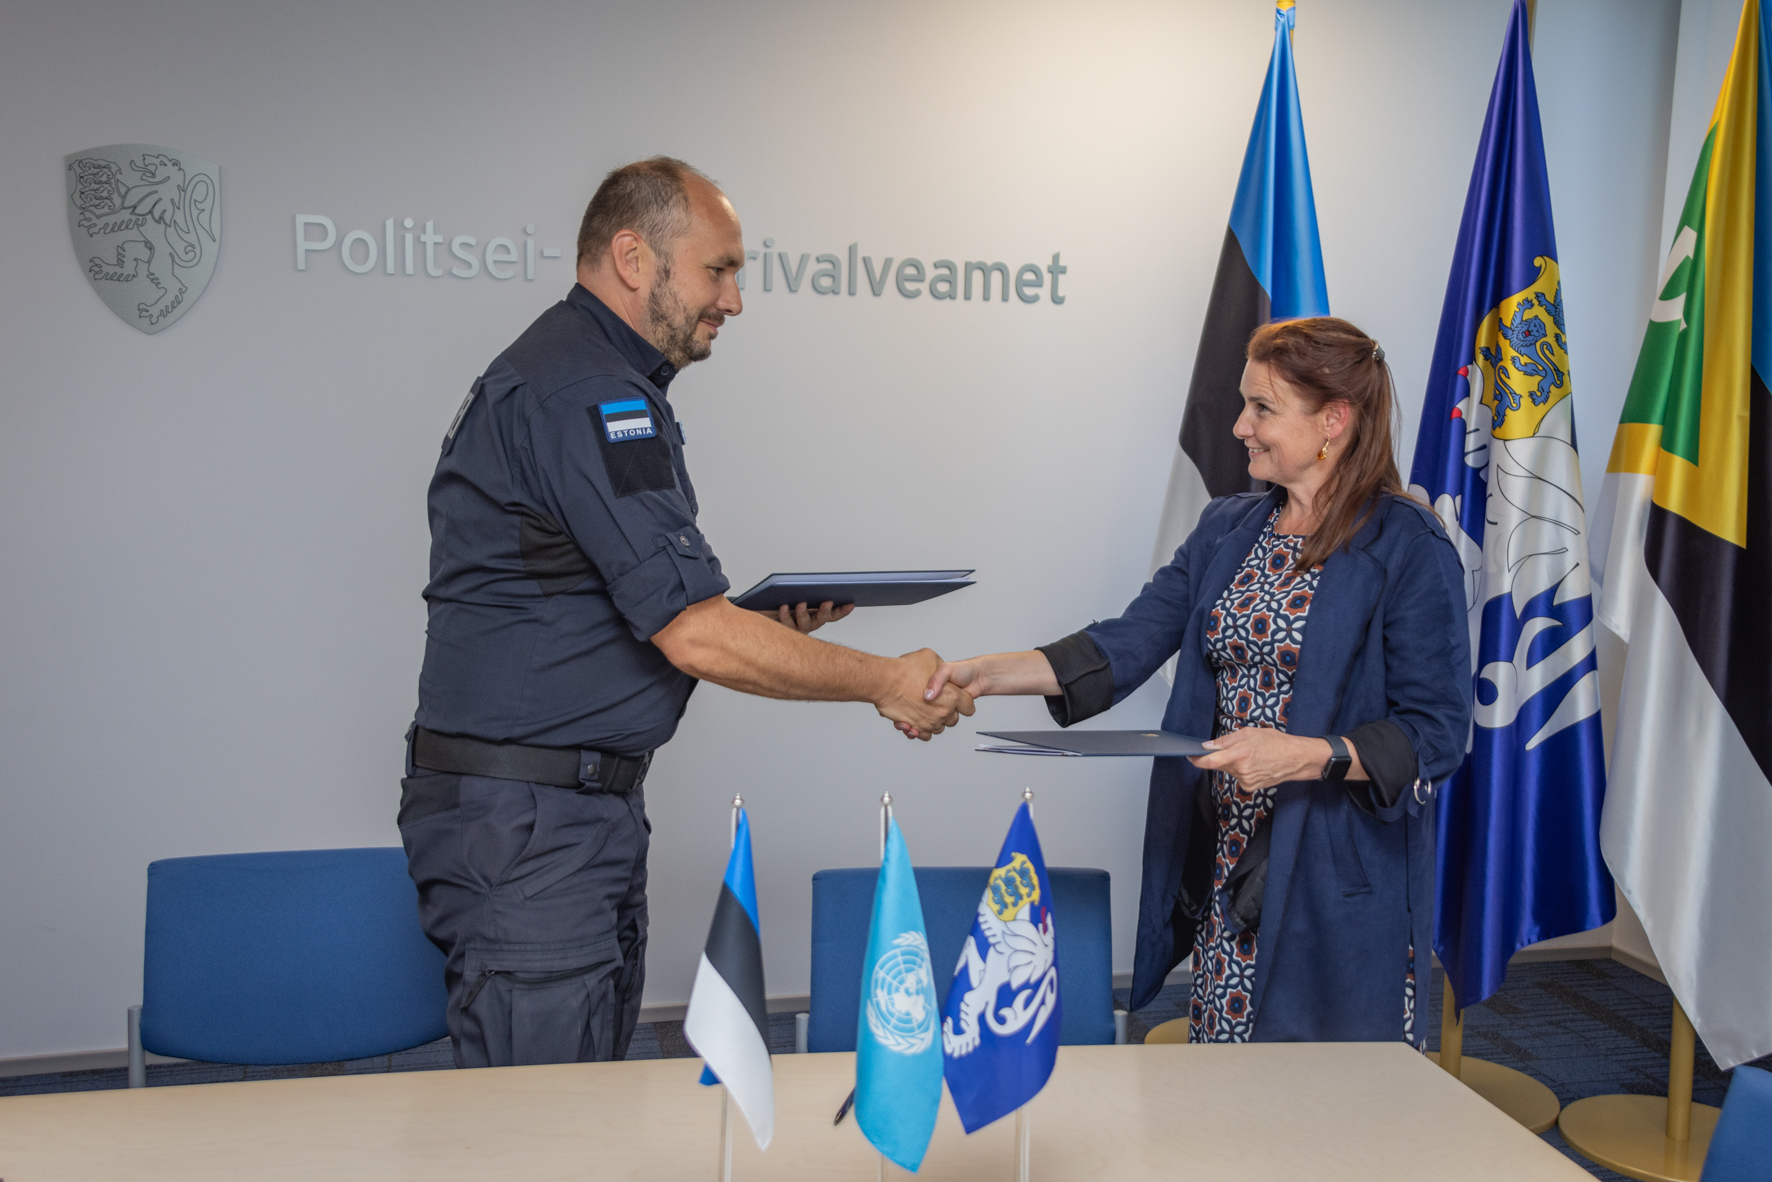 Estonian help Northern – Board UNHCR refugees Police with and Guard Border UNHCR Europe working to